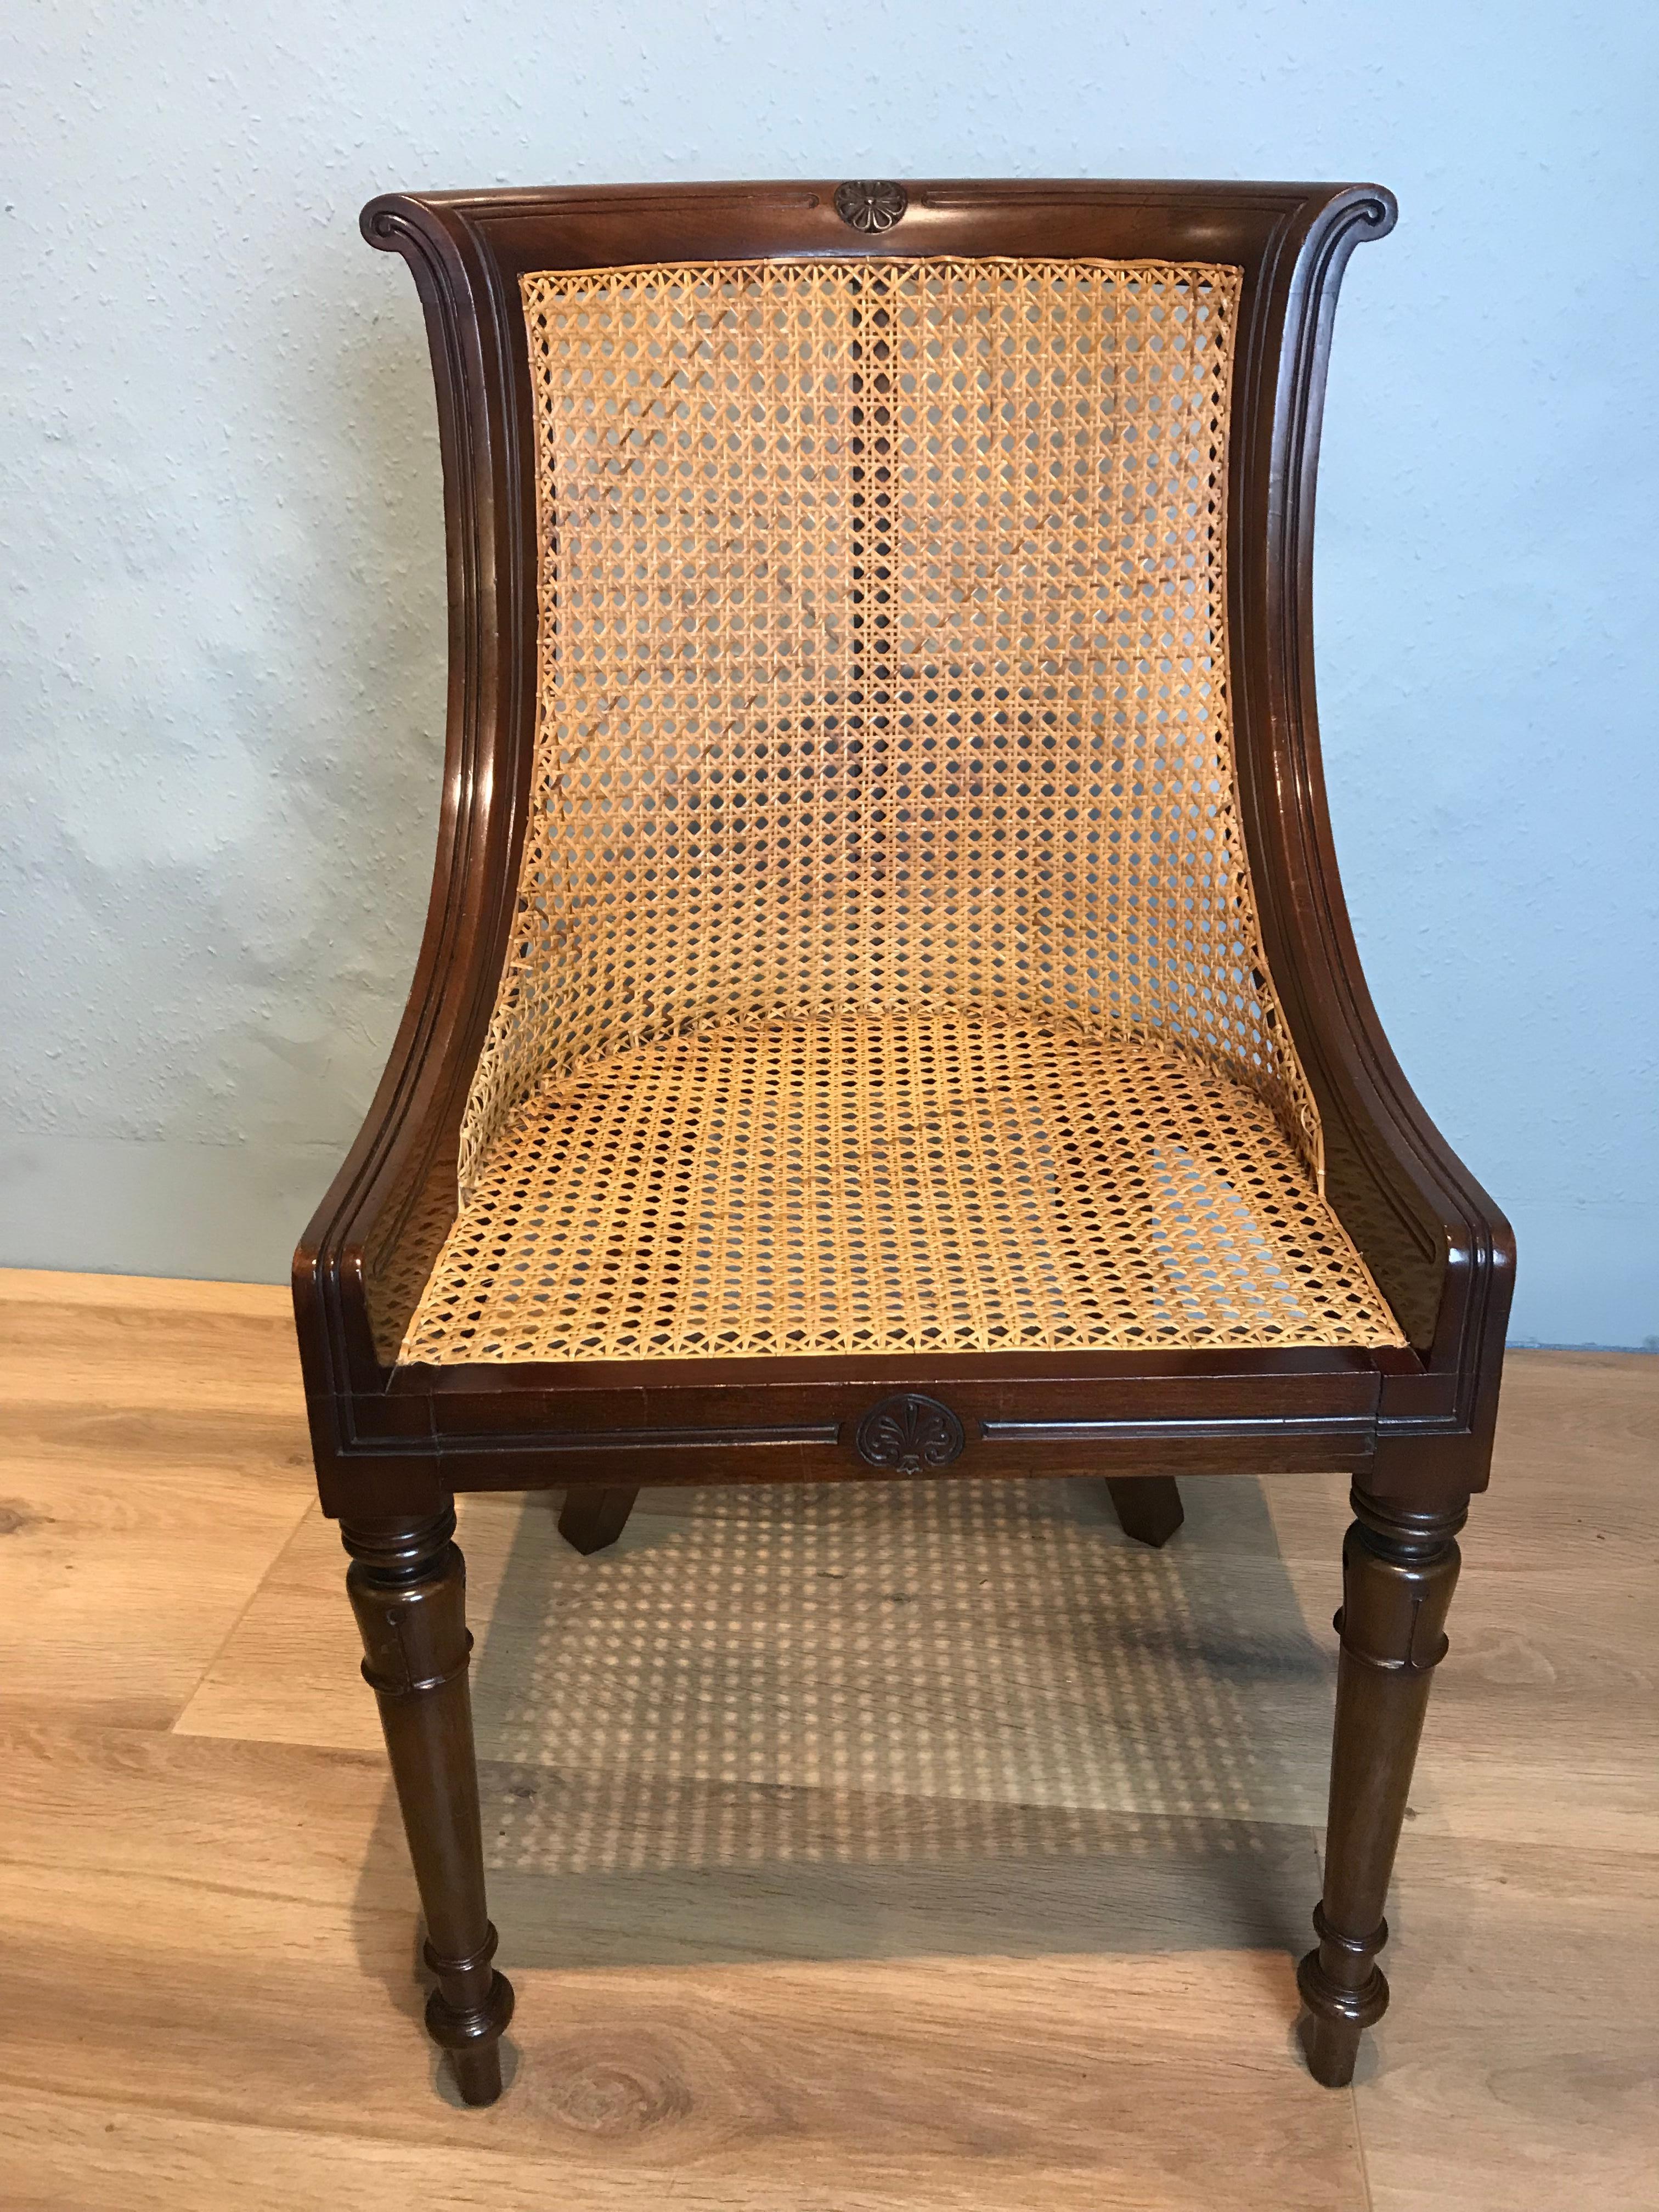 Attractive Regency caned Bergere chair, with original horse hair squab. The mahogany used has a rich colour and patina, the back is shaped and flows elegantly. The curved scrolled top rail has a flower decoration and reeded mouldings running down